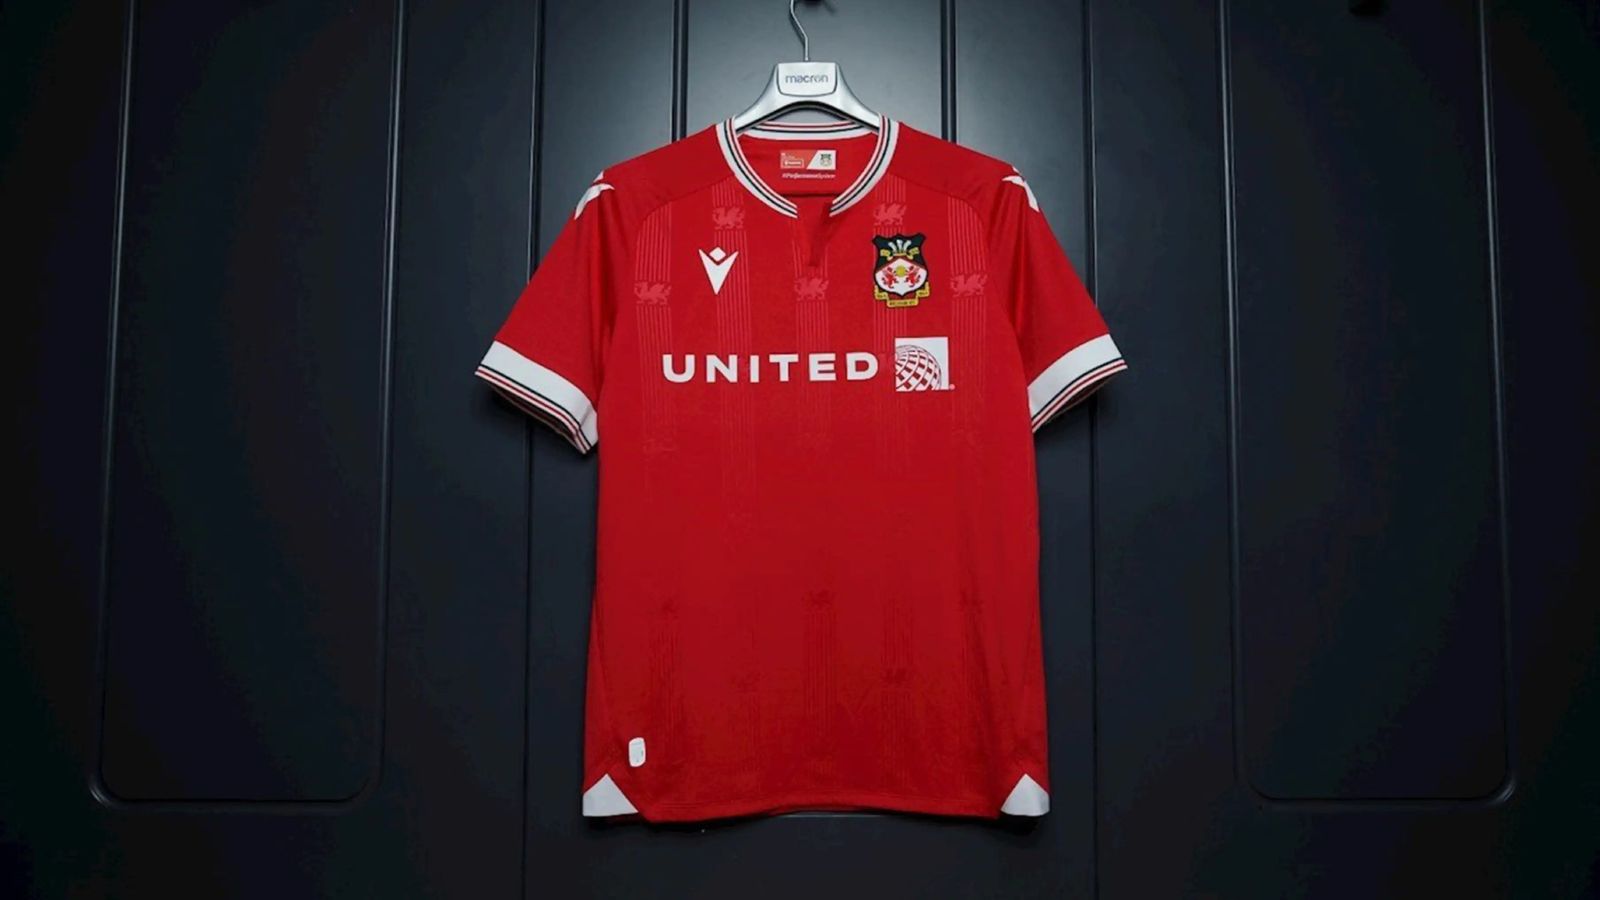 Wrexham Macron Home Kit product image of a red jersey featuring a white collar, sleeves, branding, and sponsorship in front of a black panelled background.